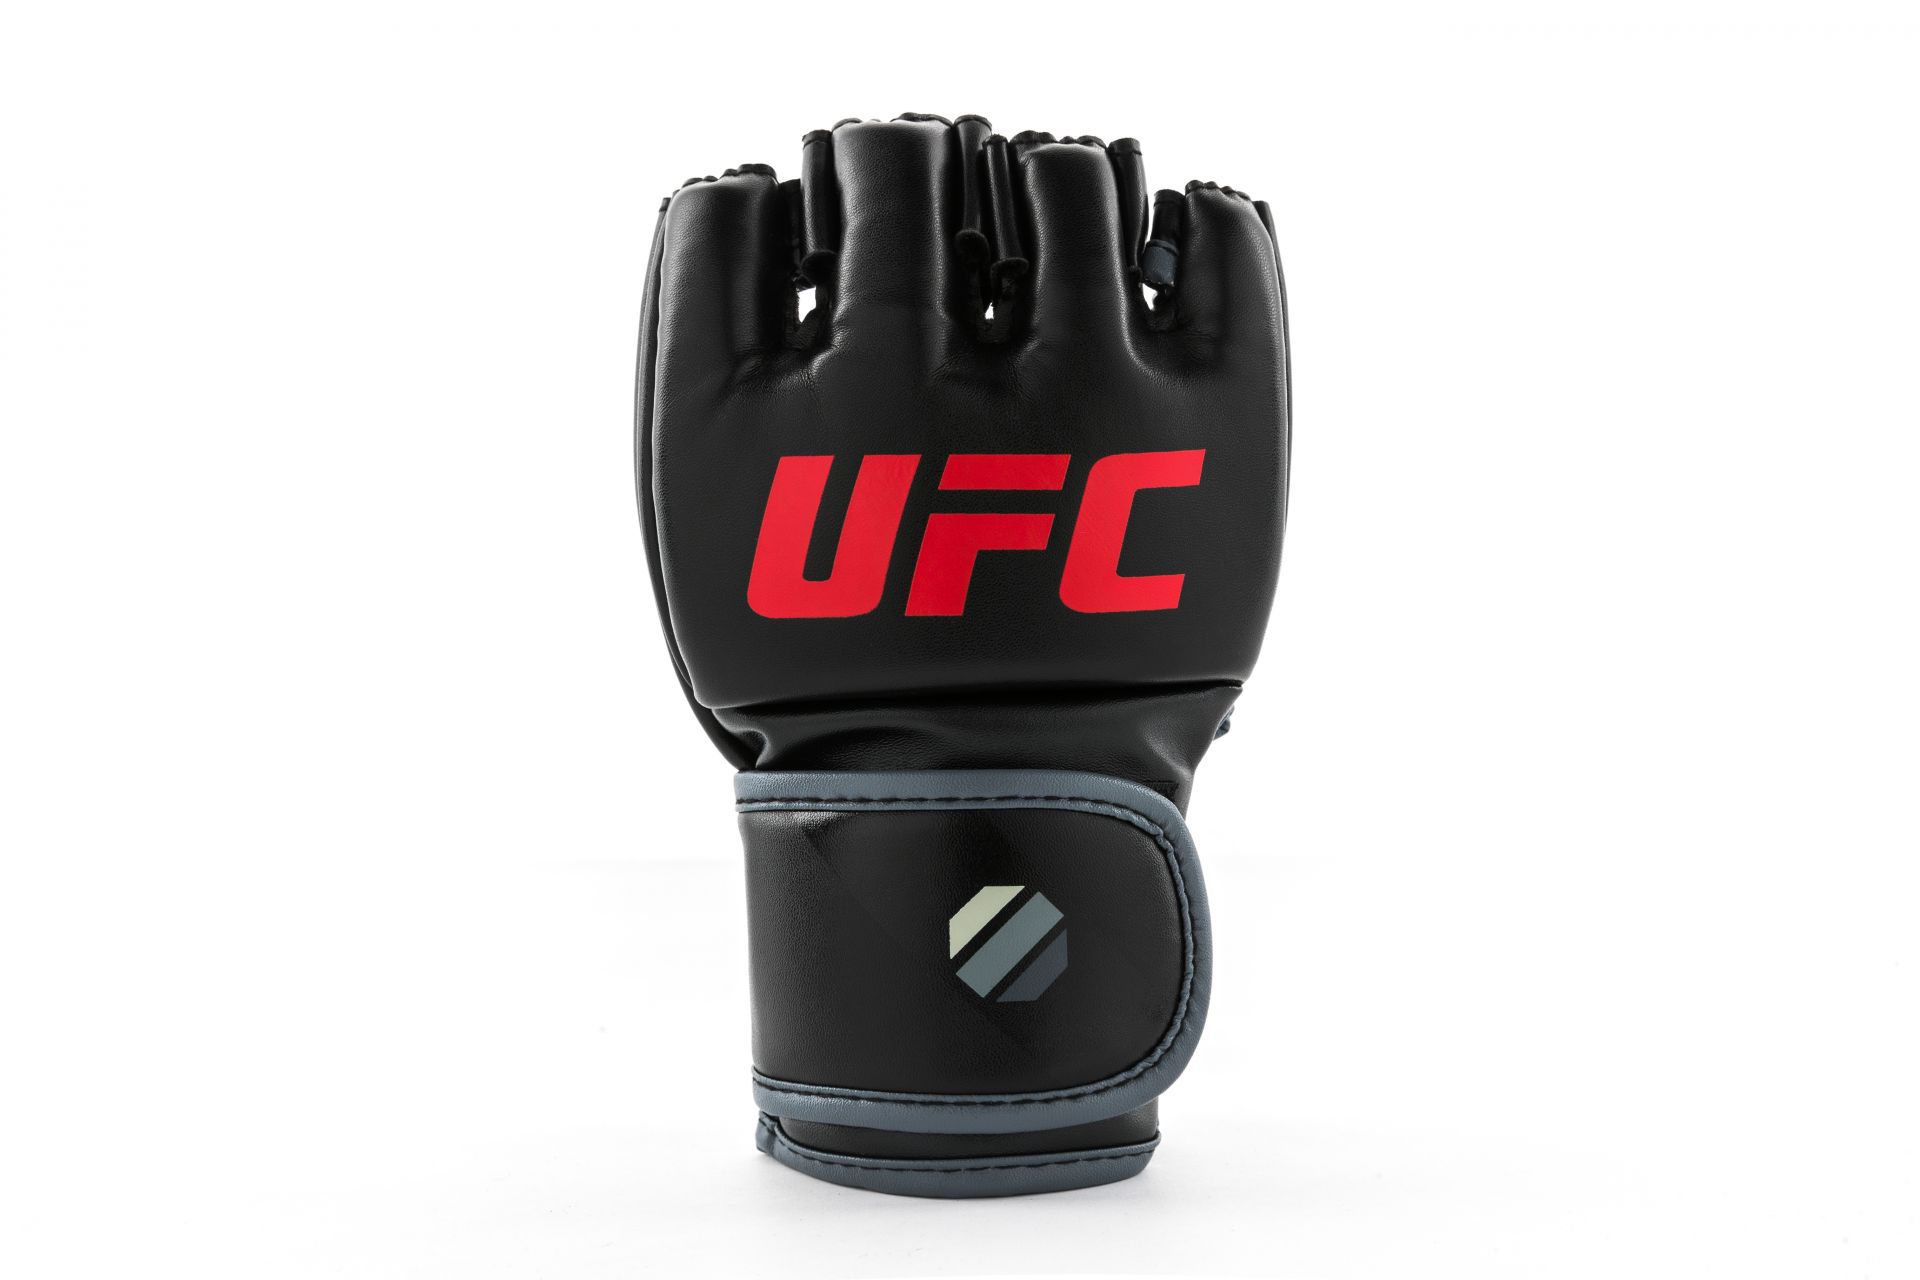 MMA Grappling Gloves